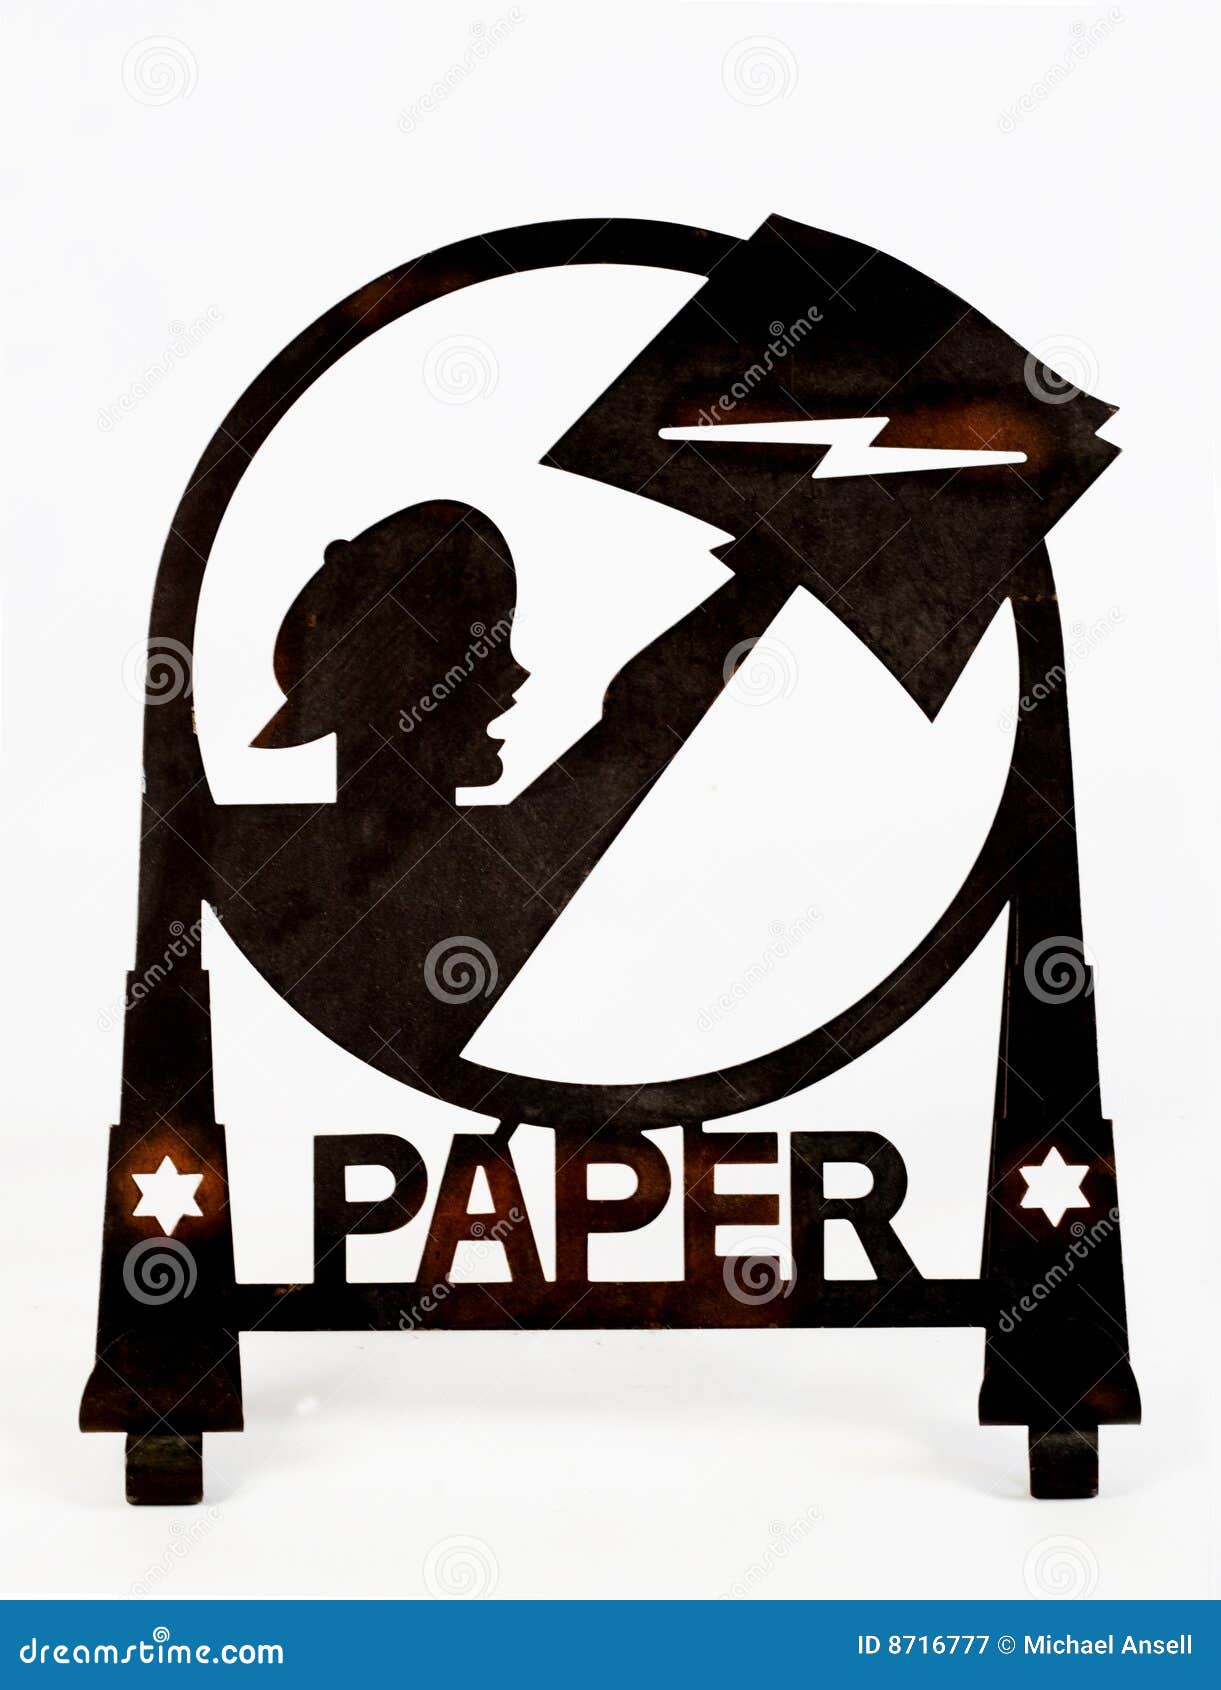 newspaper stand clipart - photo #36